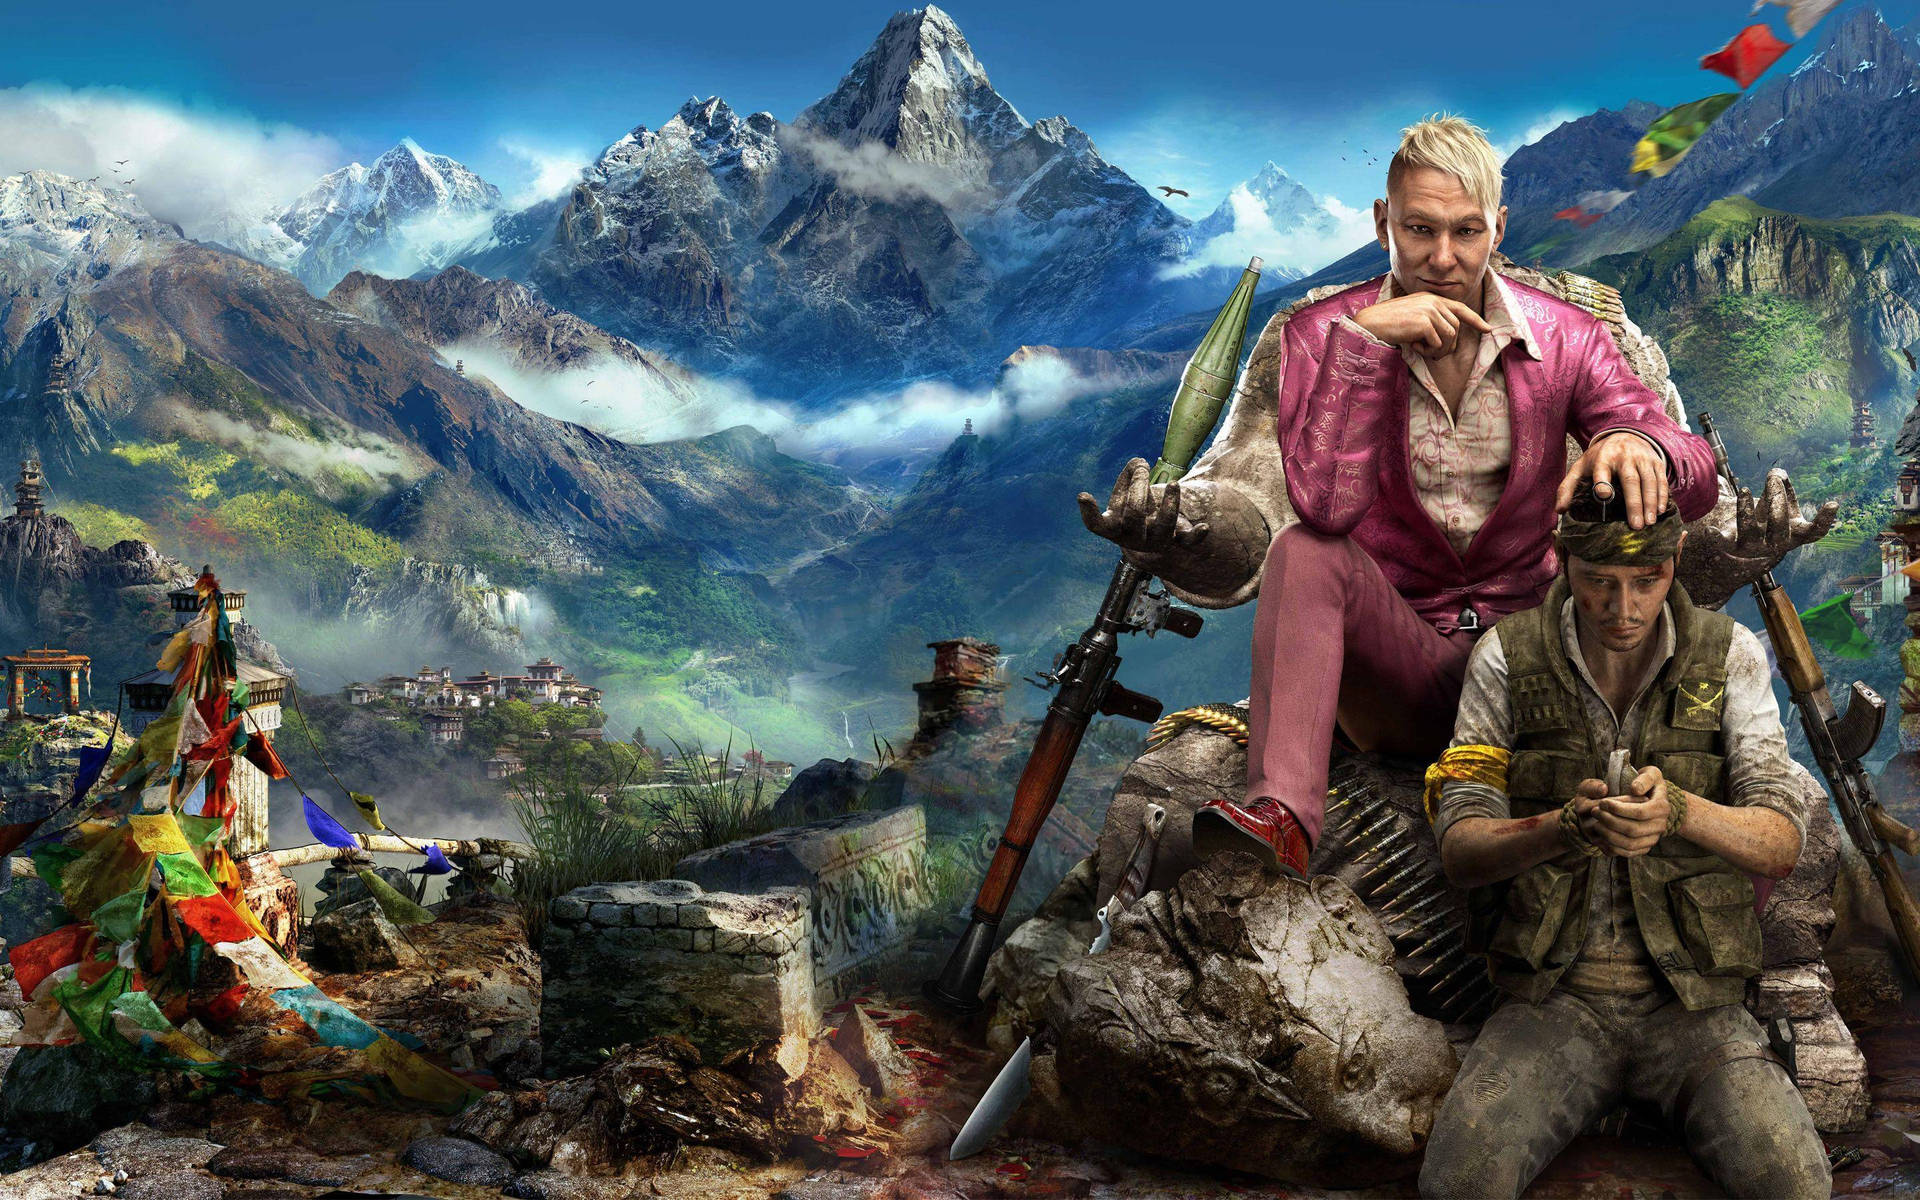 Top 999+ Far Cry 4 Wallpaper Full HD, 4K✅Free to Use